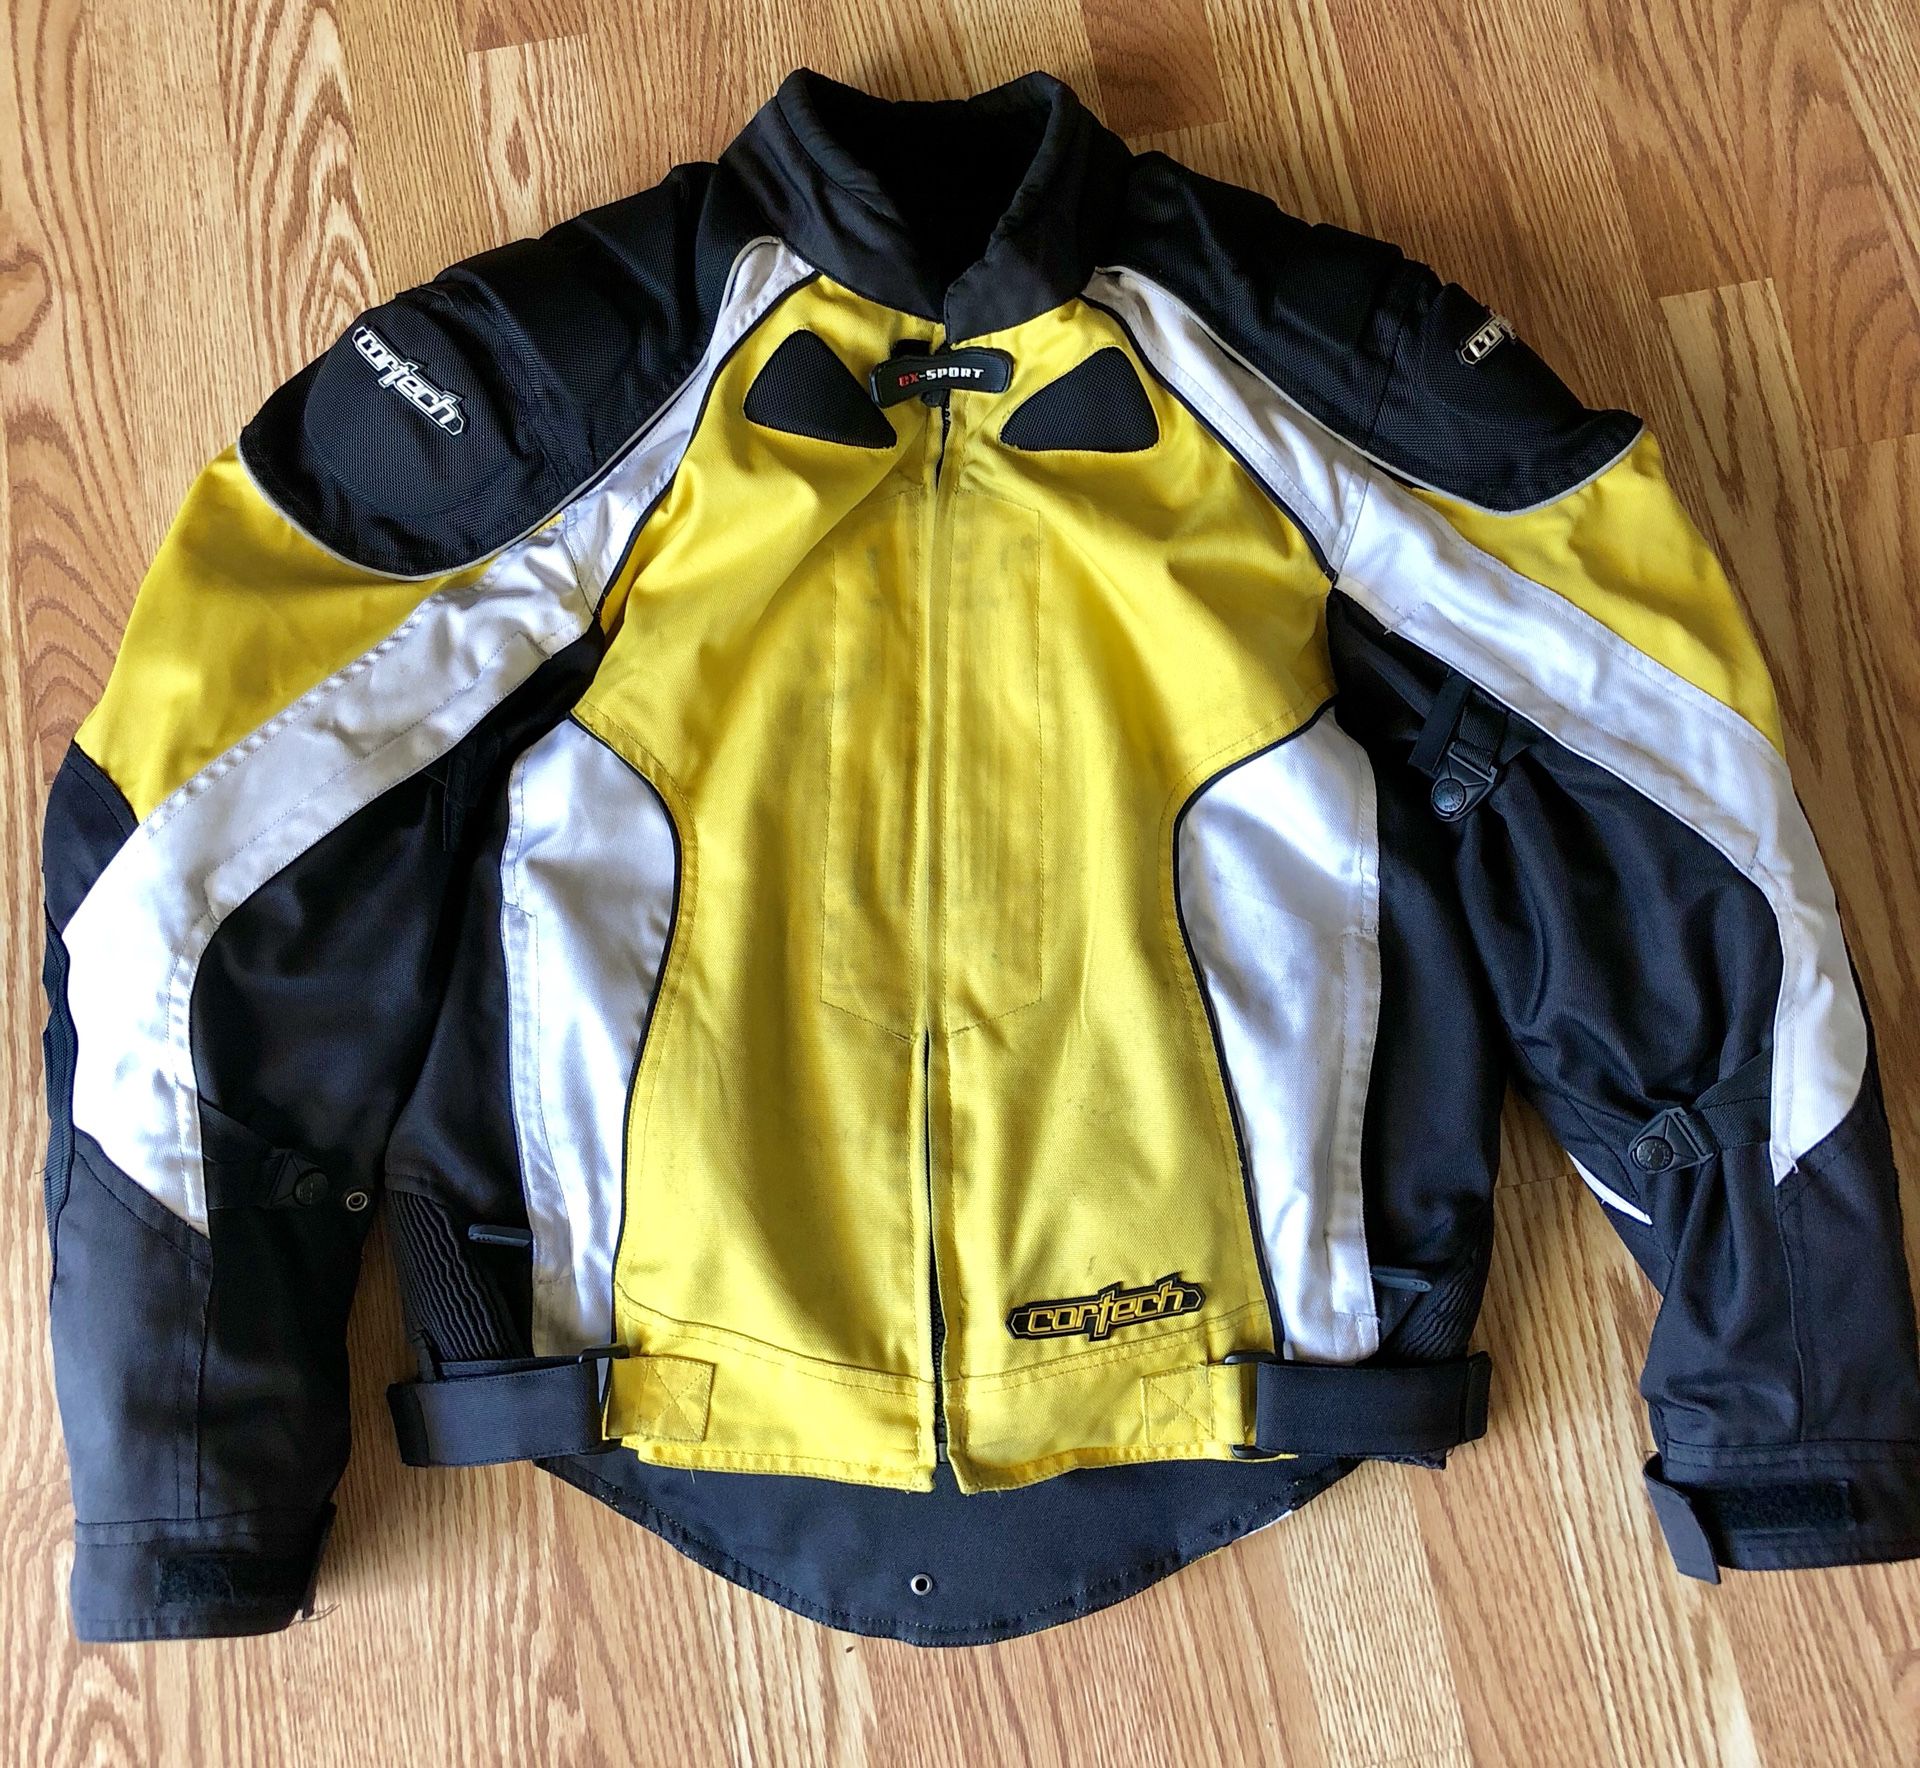 Motorcycle jacket with inner removable vest and air vents